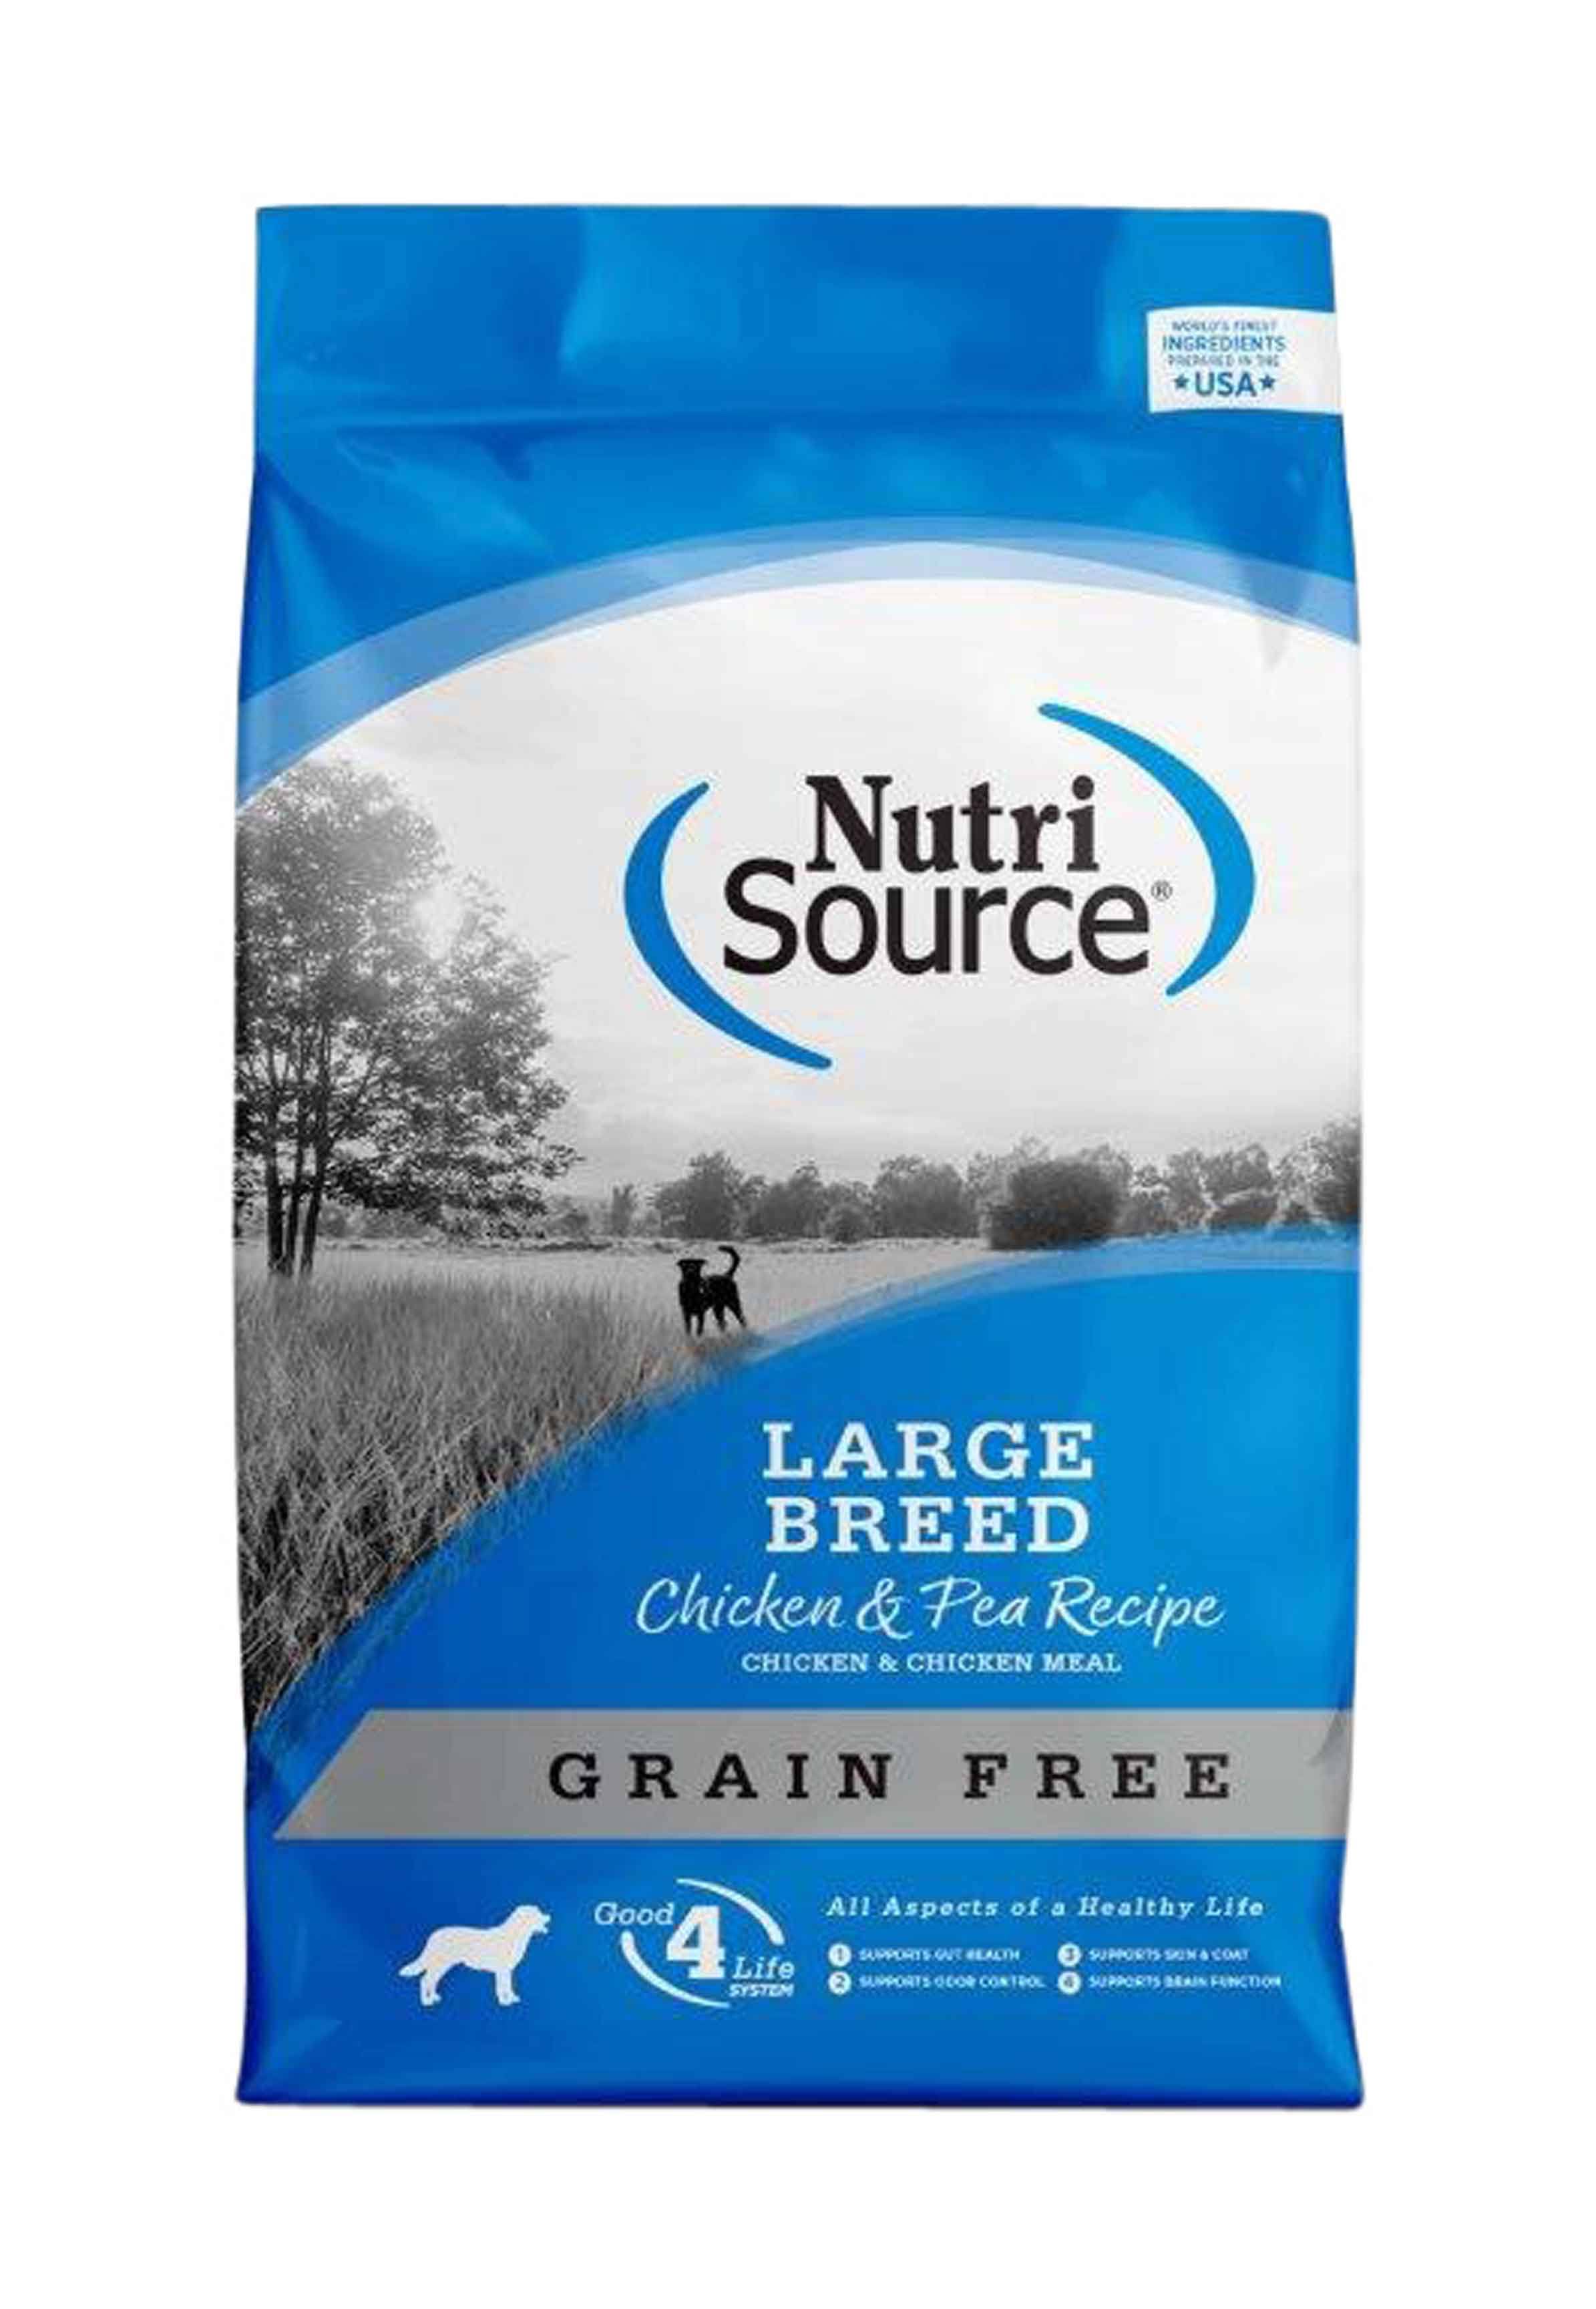 NutriSource Grain Free Large Breed Chicken & Pea Dog Food, 30lb